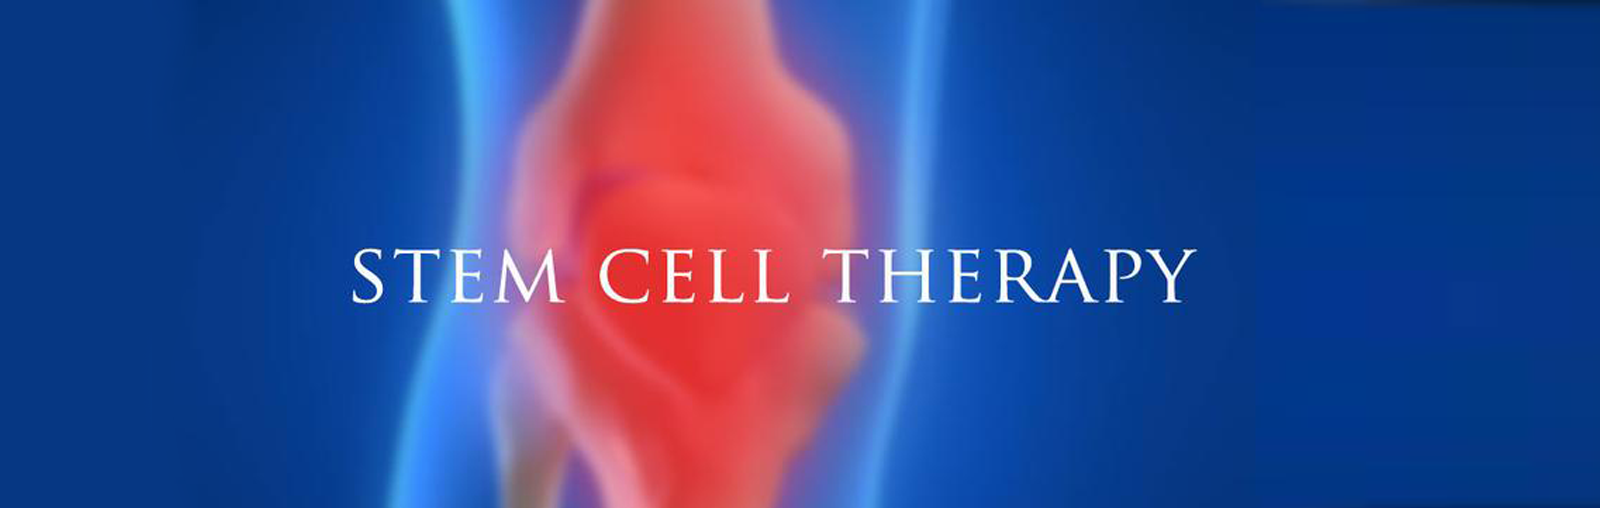 Stem-cells-therapy